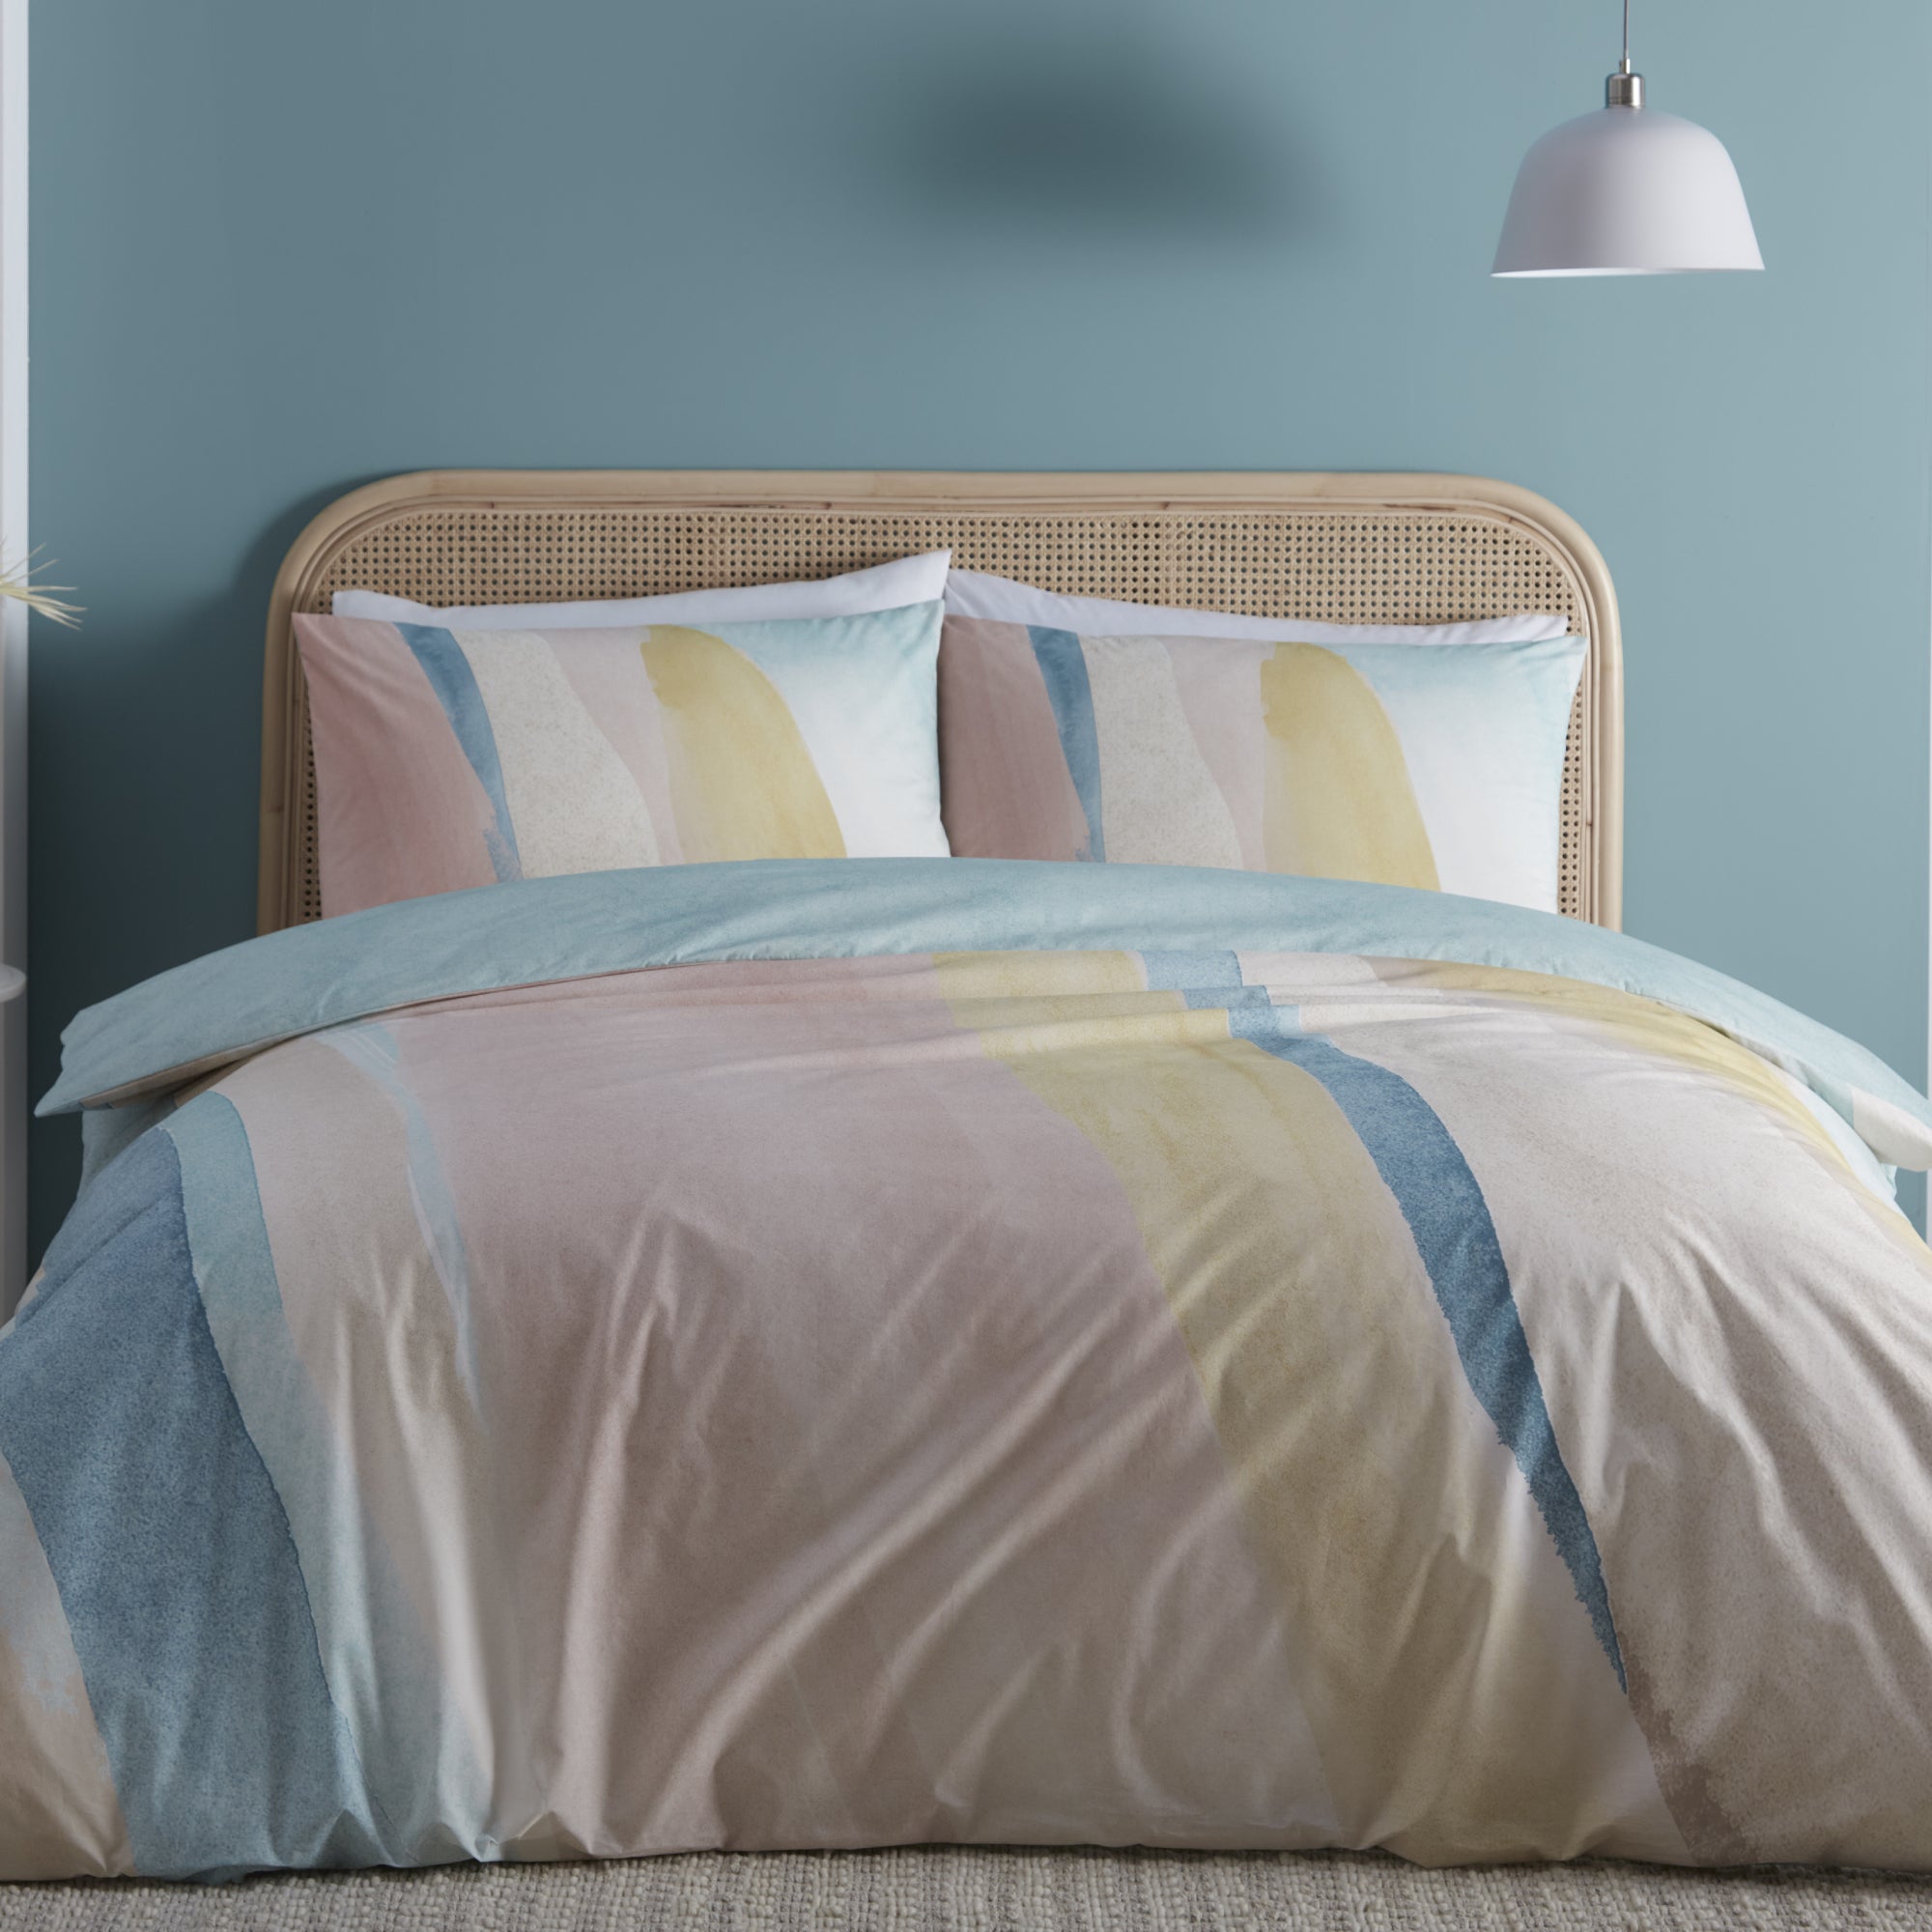 Peyton Duvet Cover Set by Appletree Style in Coral - Duvet Cover Set - Appletree Style